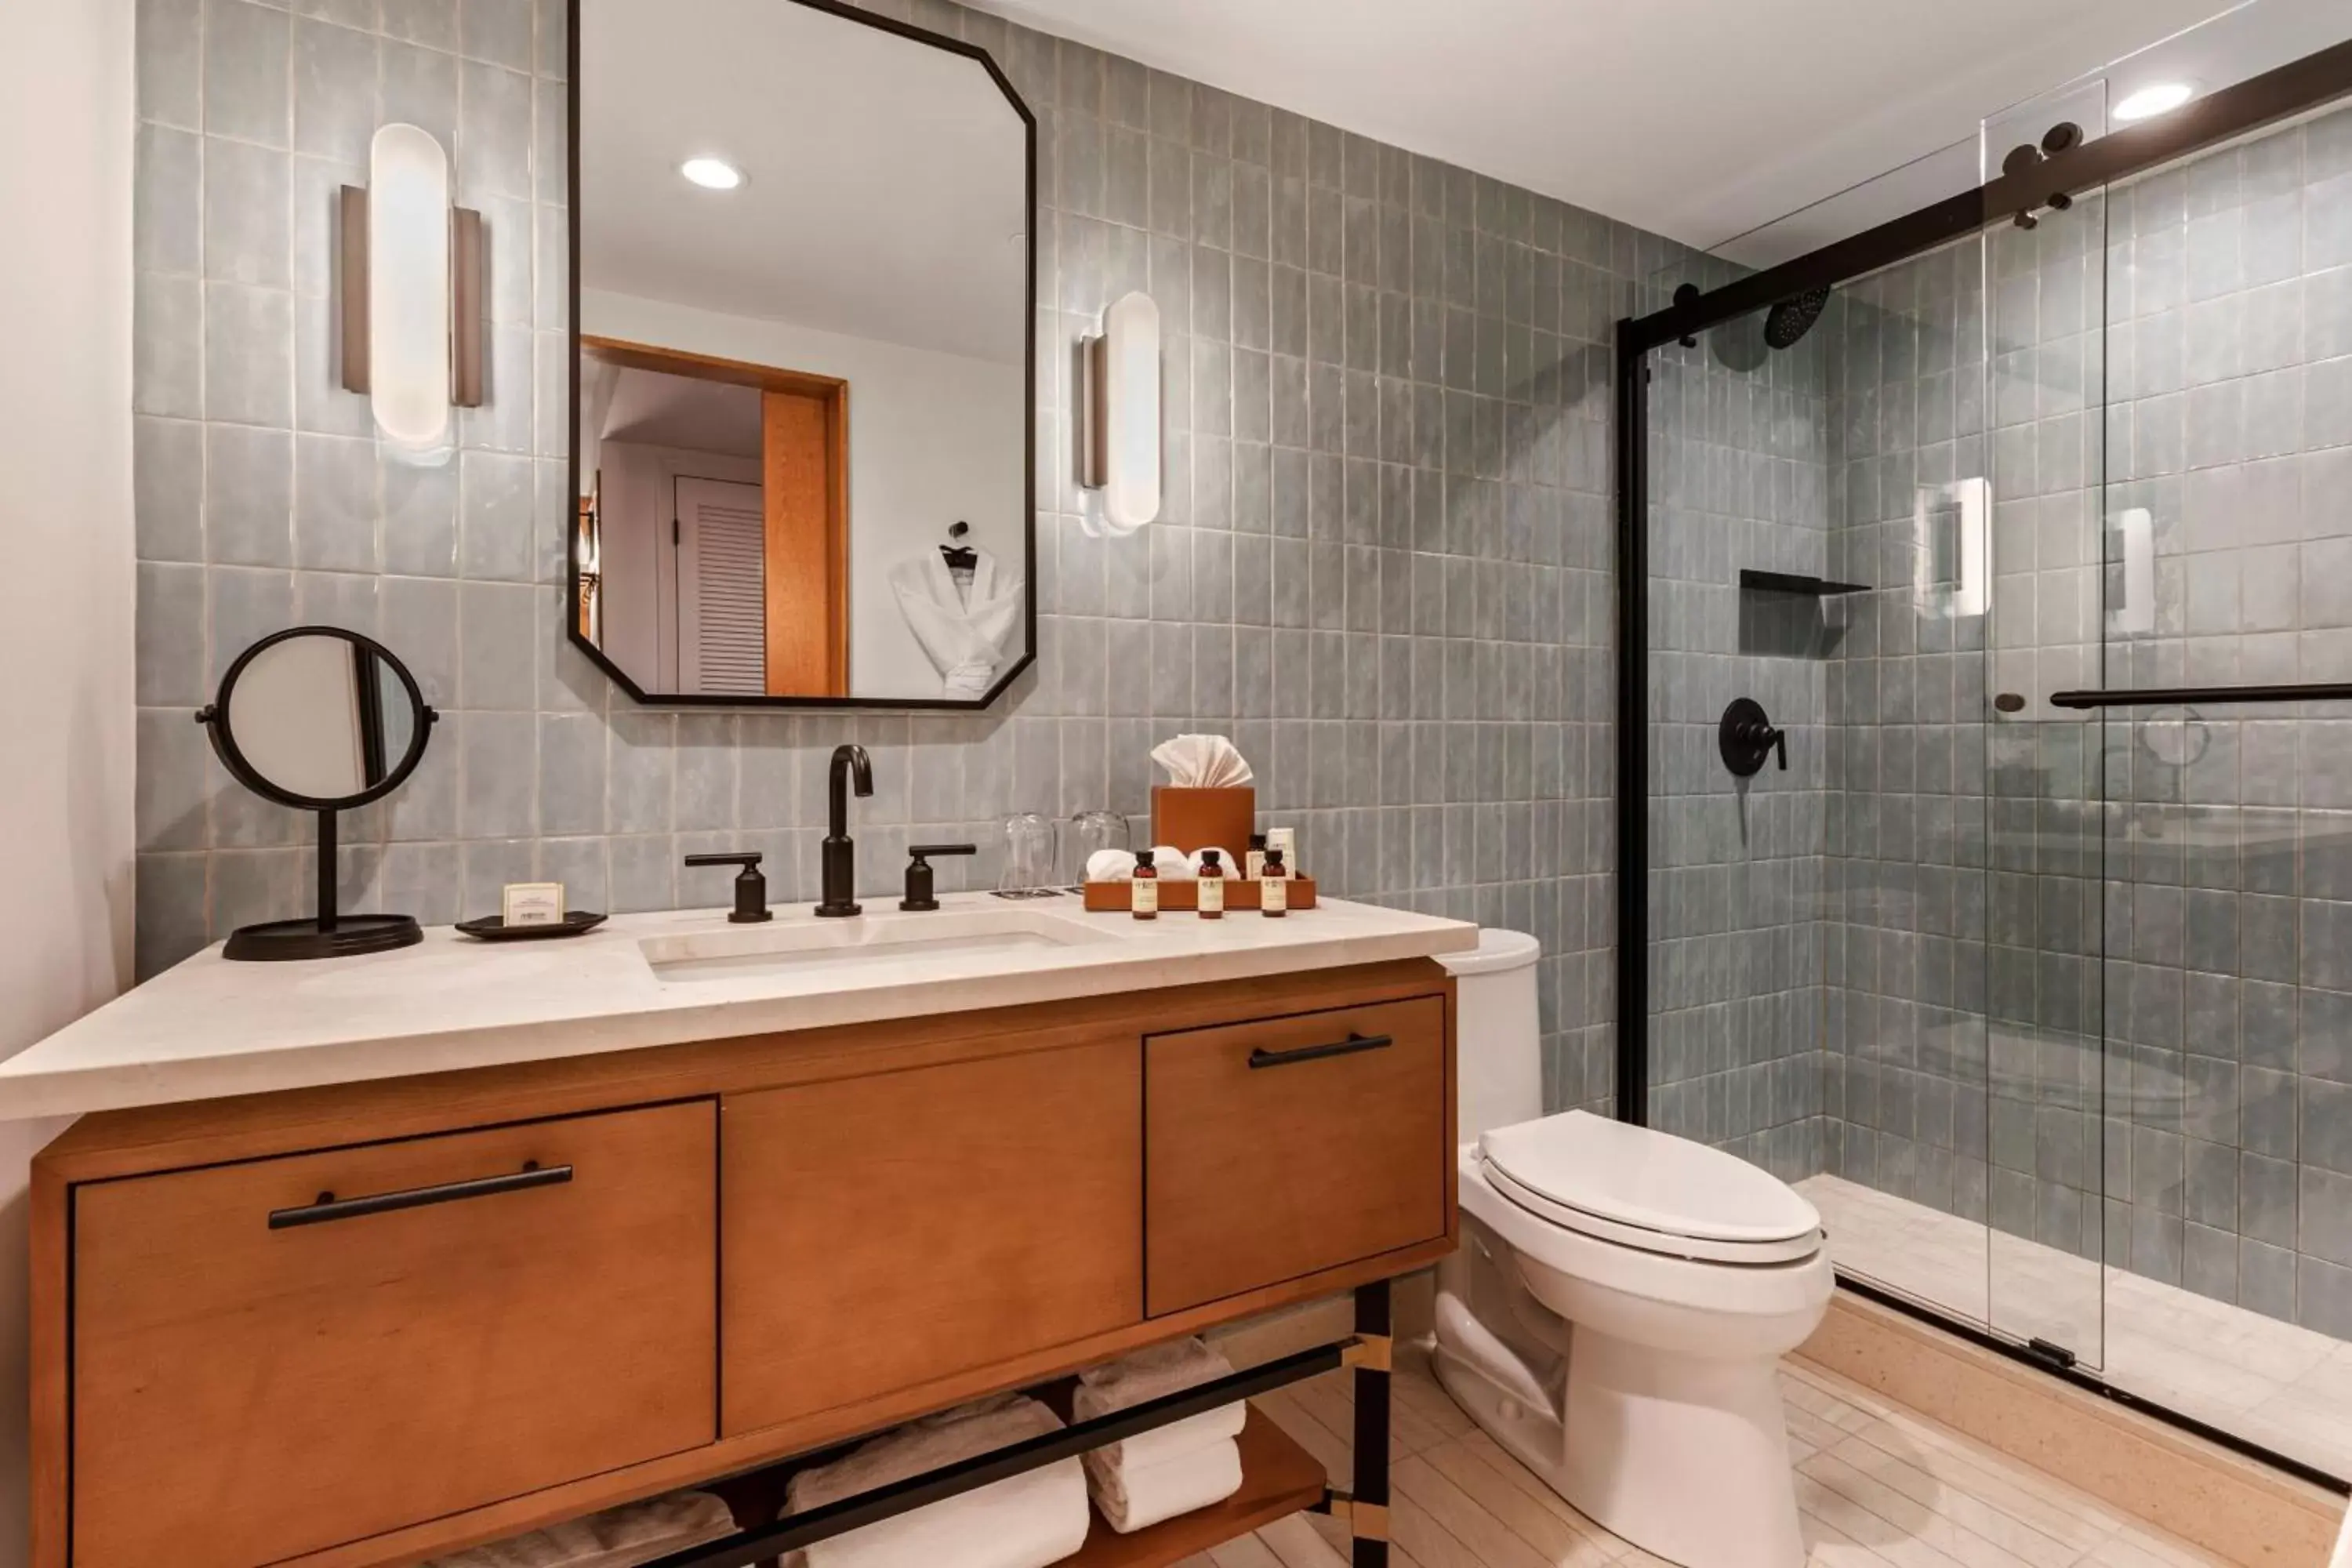 Bathroom in Merriweather Lakehouse Hotel, Autograph Collection